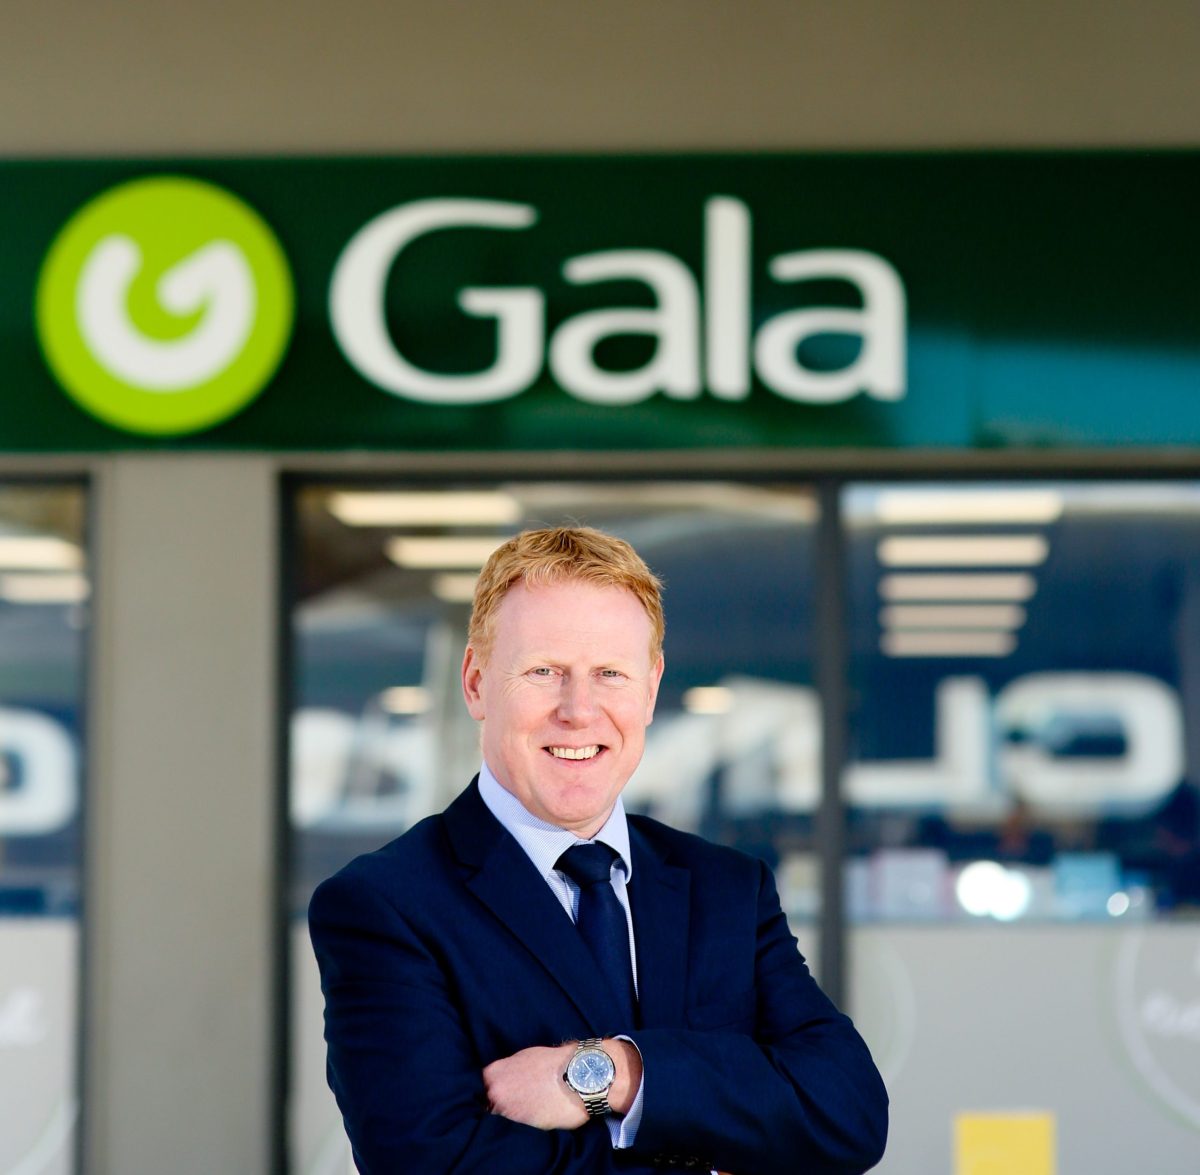 Going for Growth: we talk to Gala Retail’s Gary Desmond